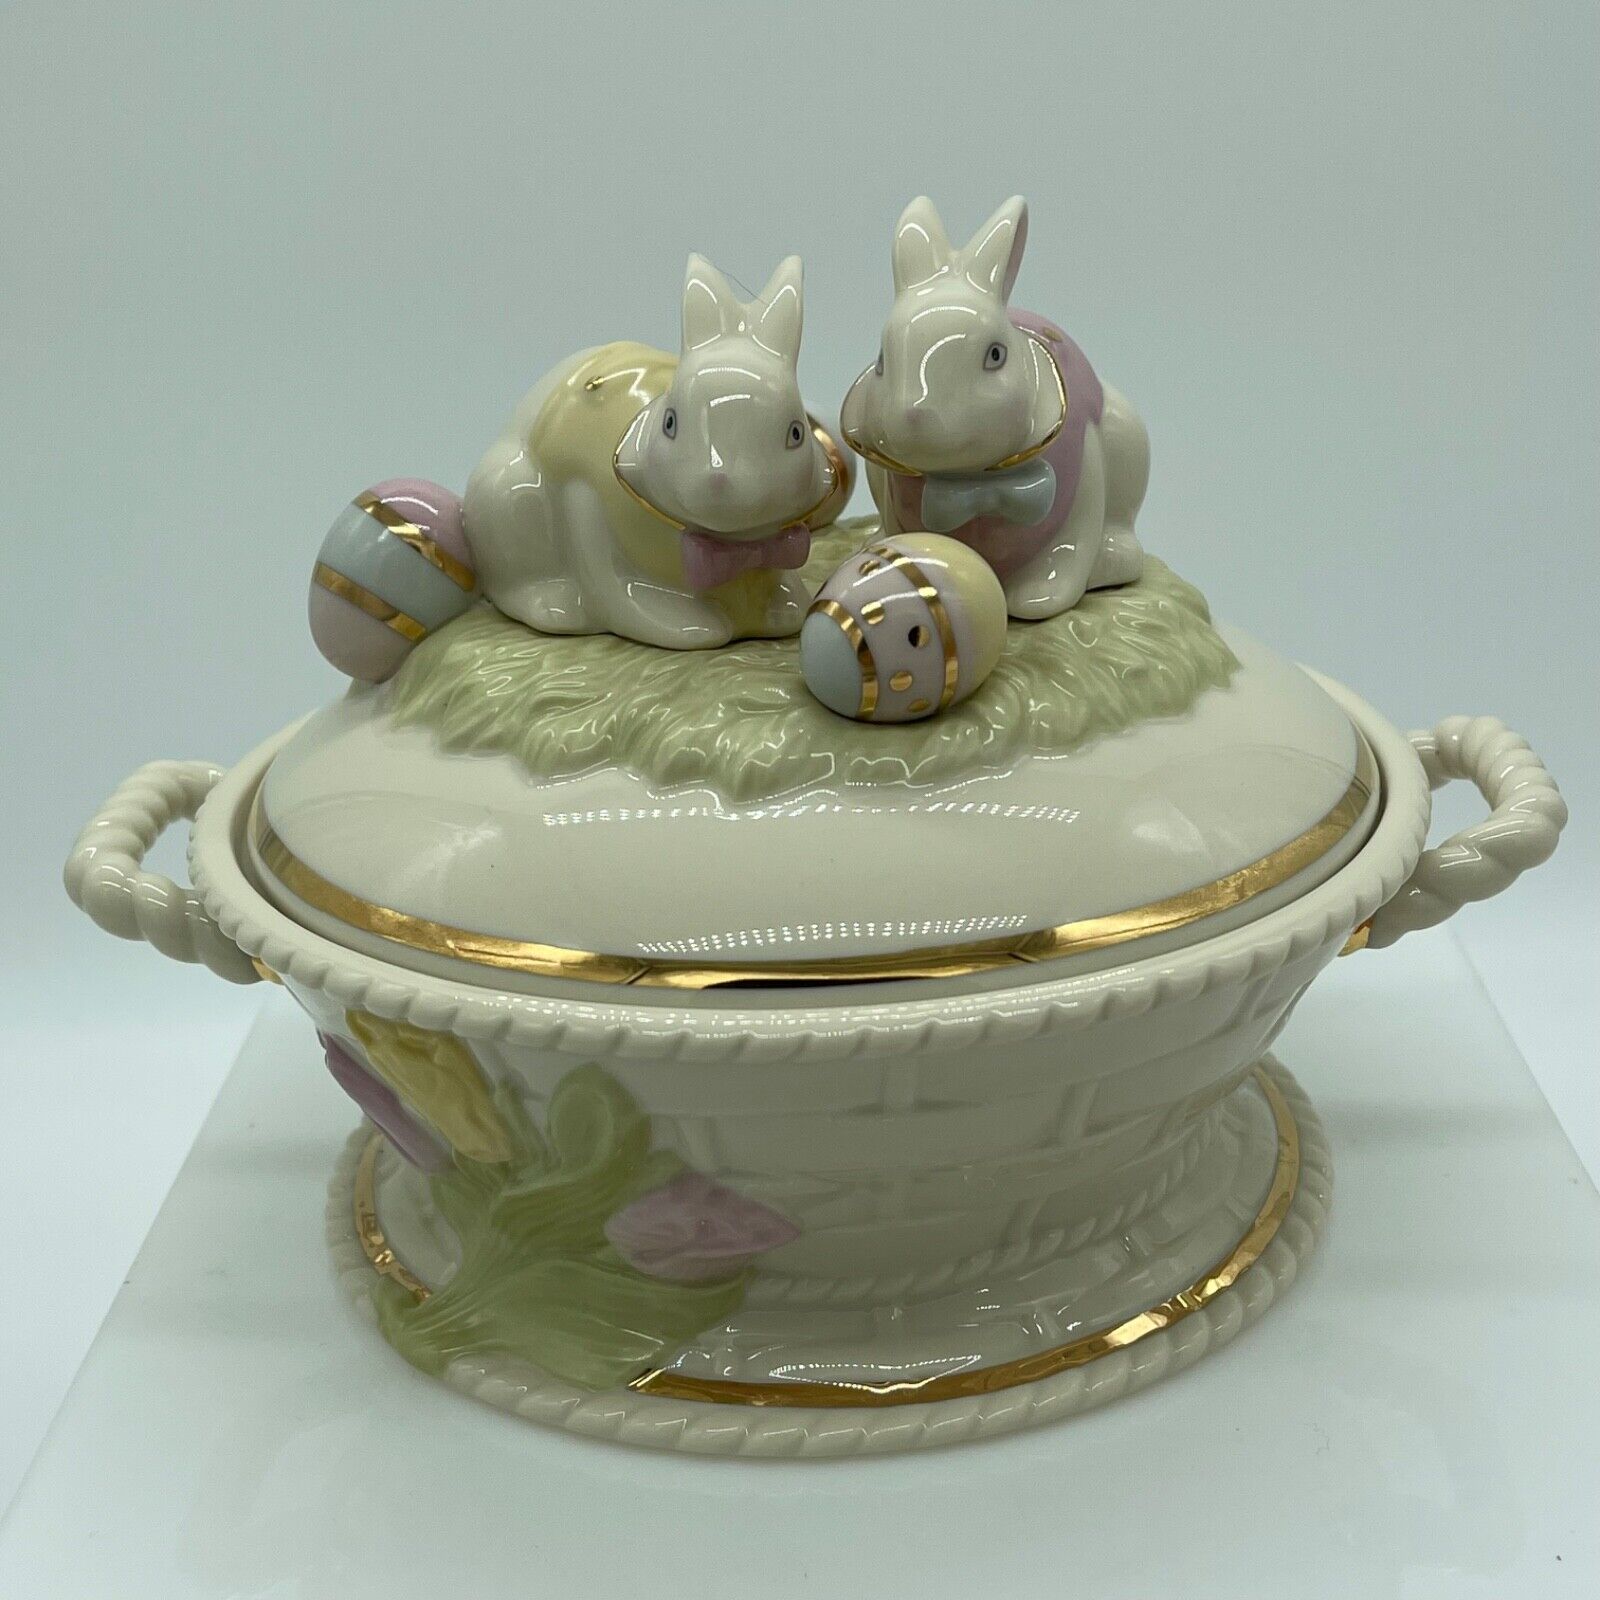 Lenox Occasions Easter Bunny Covered Candy Dish Ceramic Basket w/Bunnies & Eggs